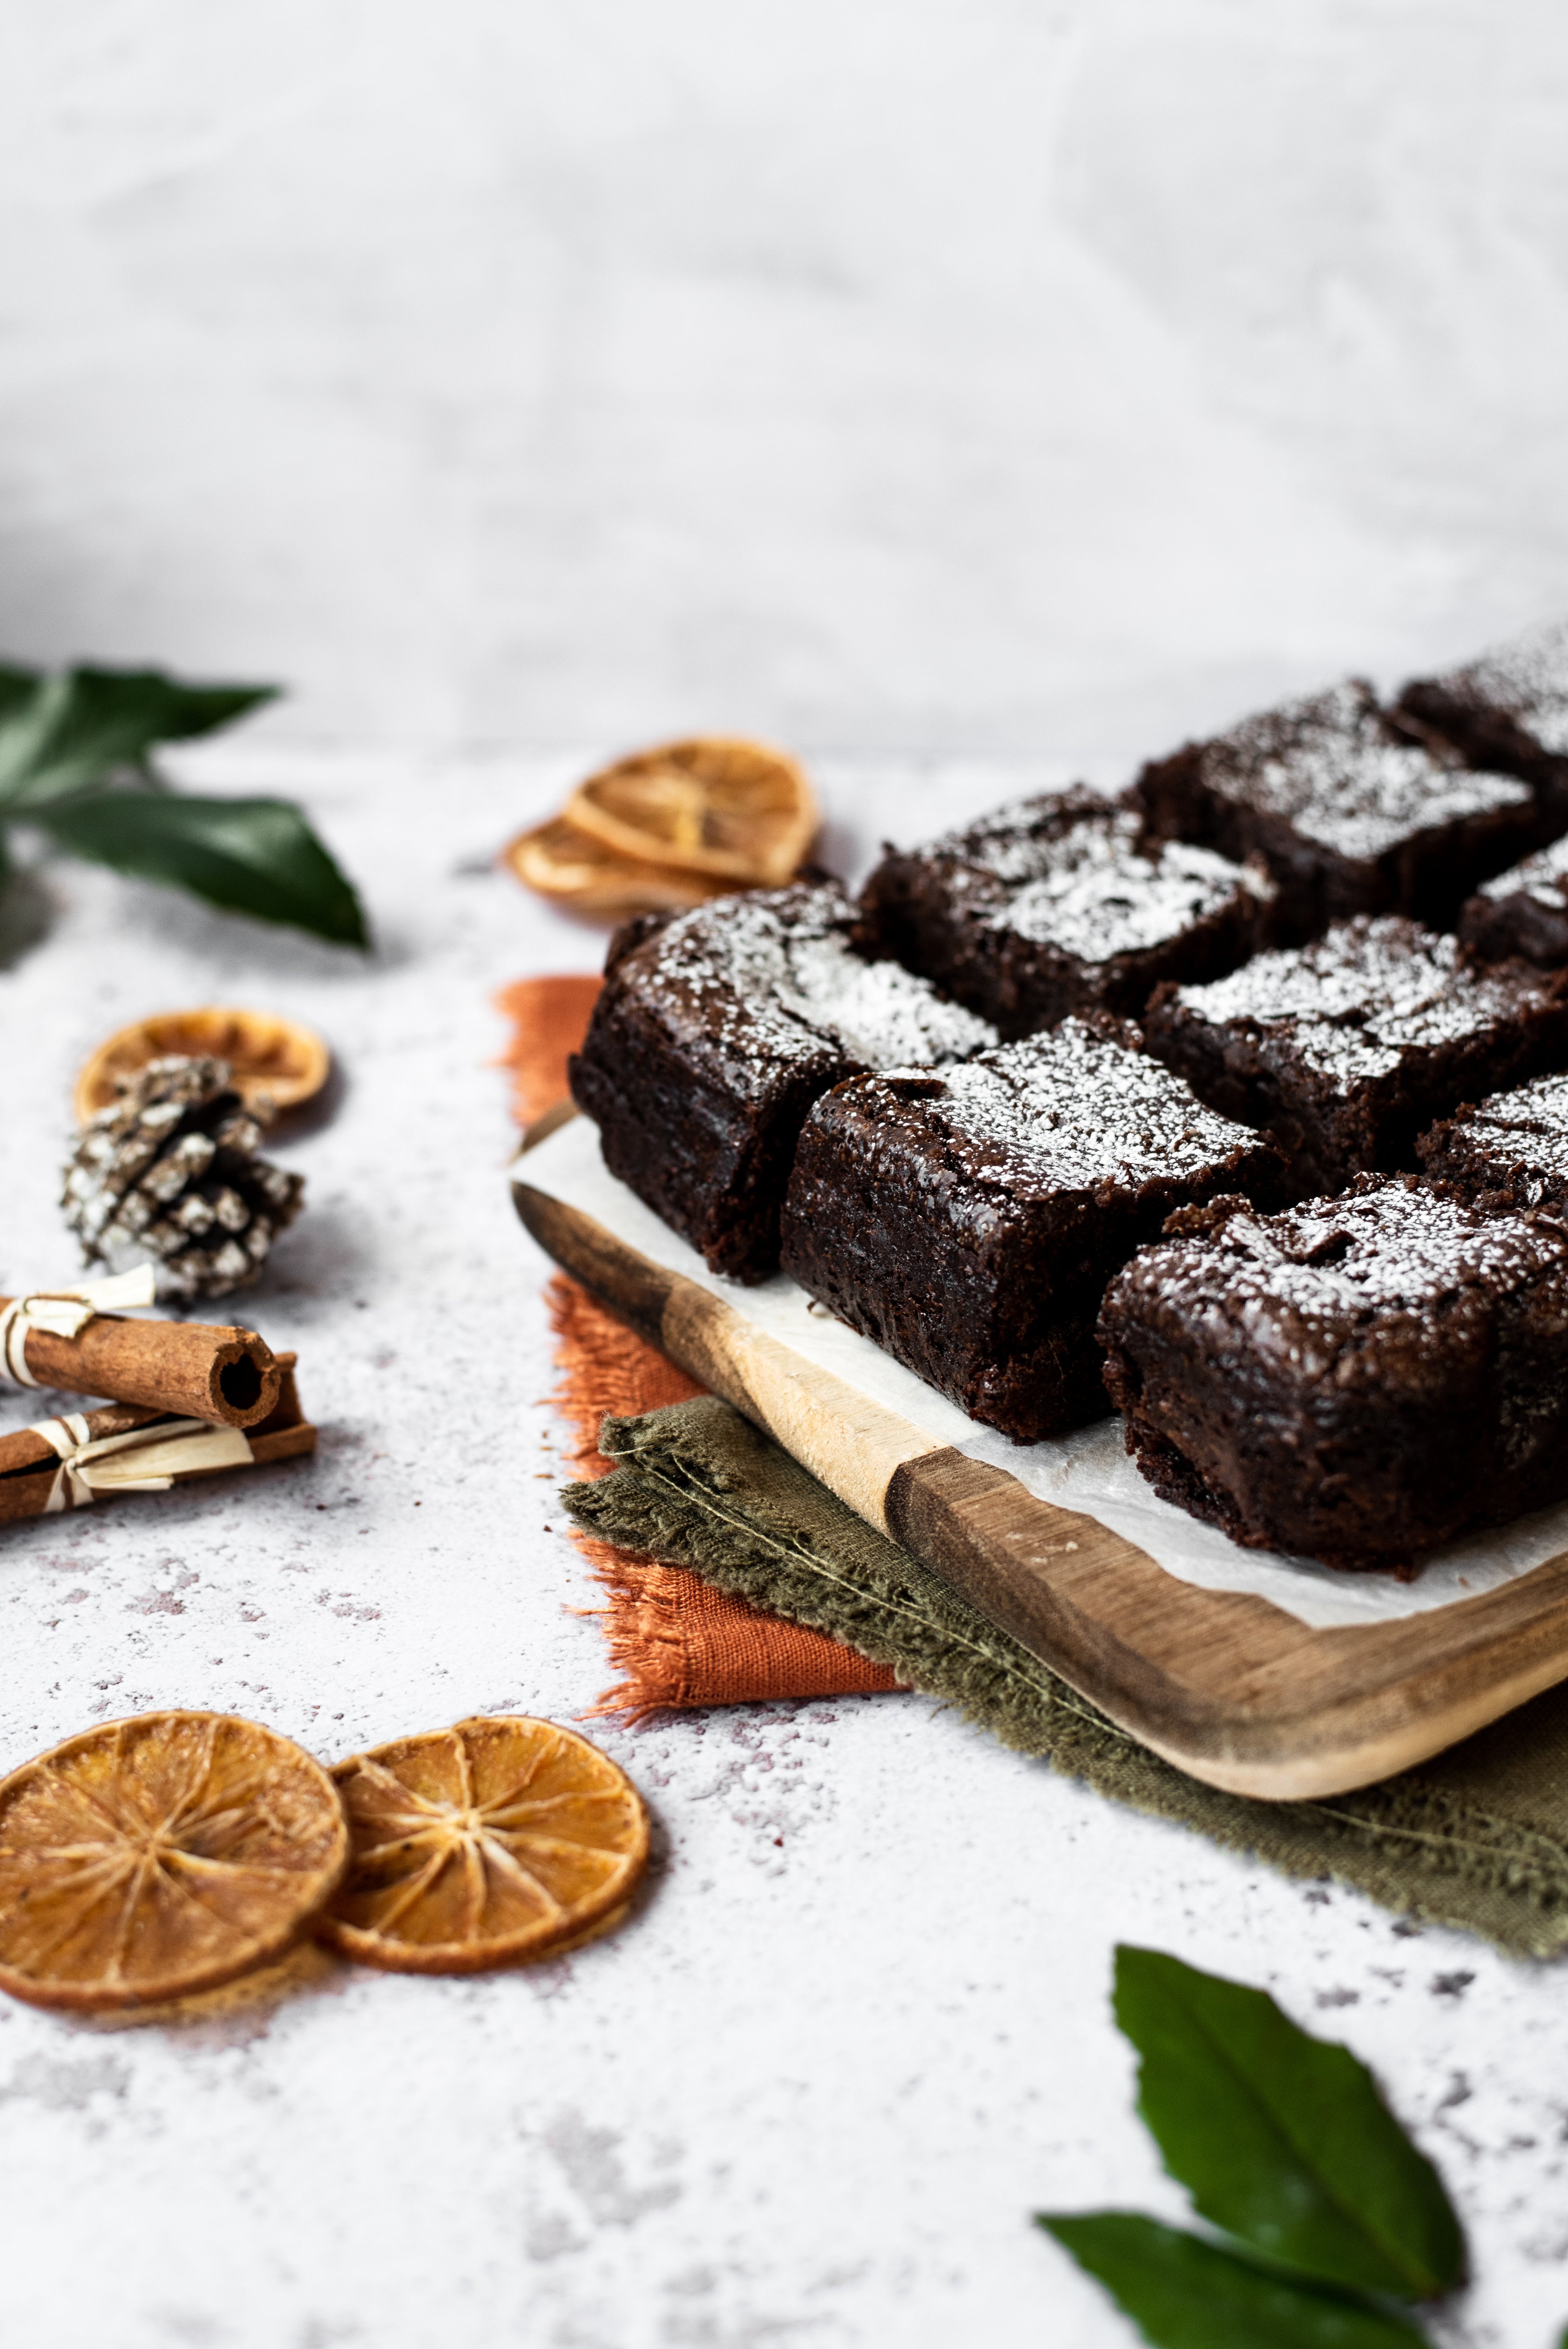 Brownie chopped into squares on chopping board with dried orange and cinnamon sticks